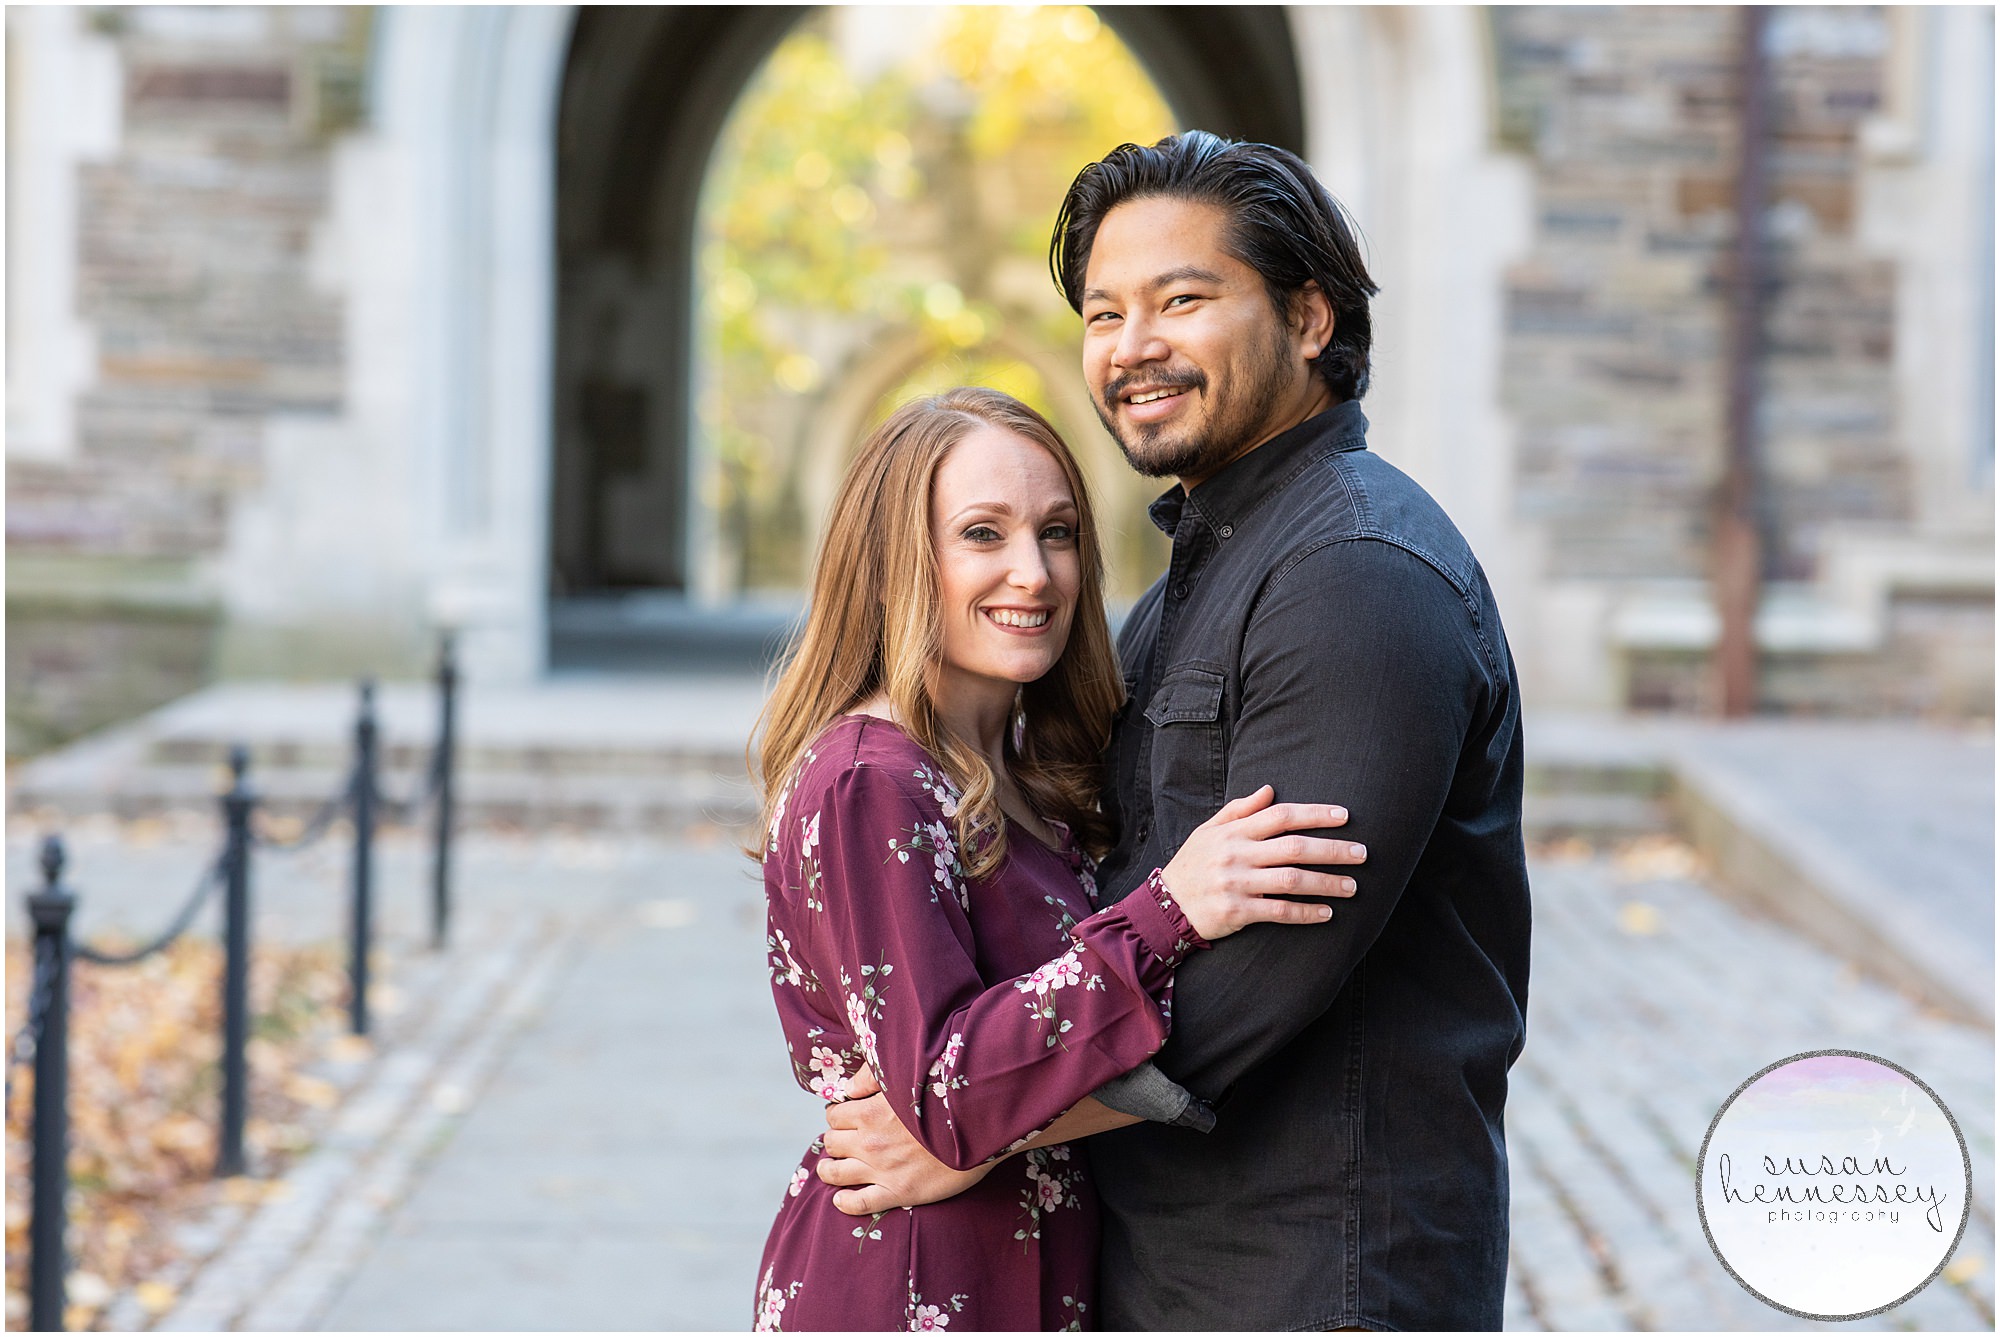 A happily engaged couple at Princeton University in New Jersey